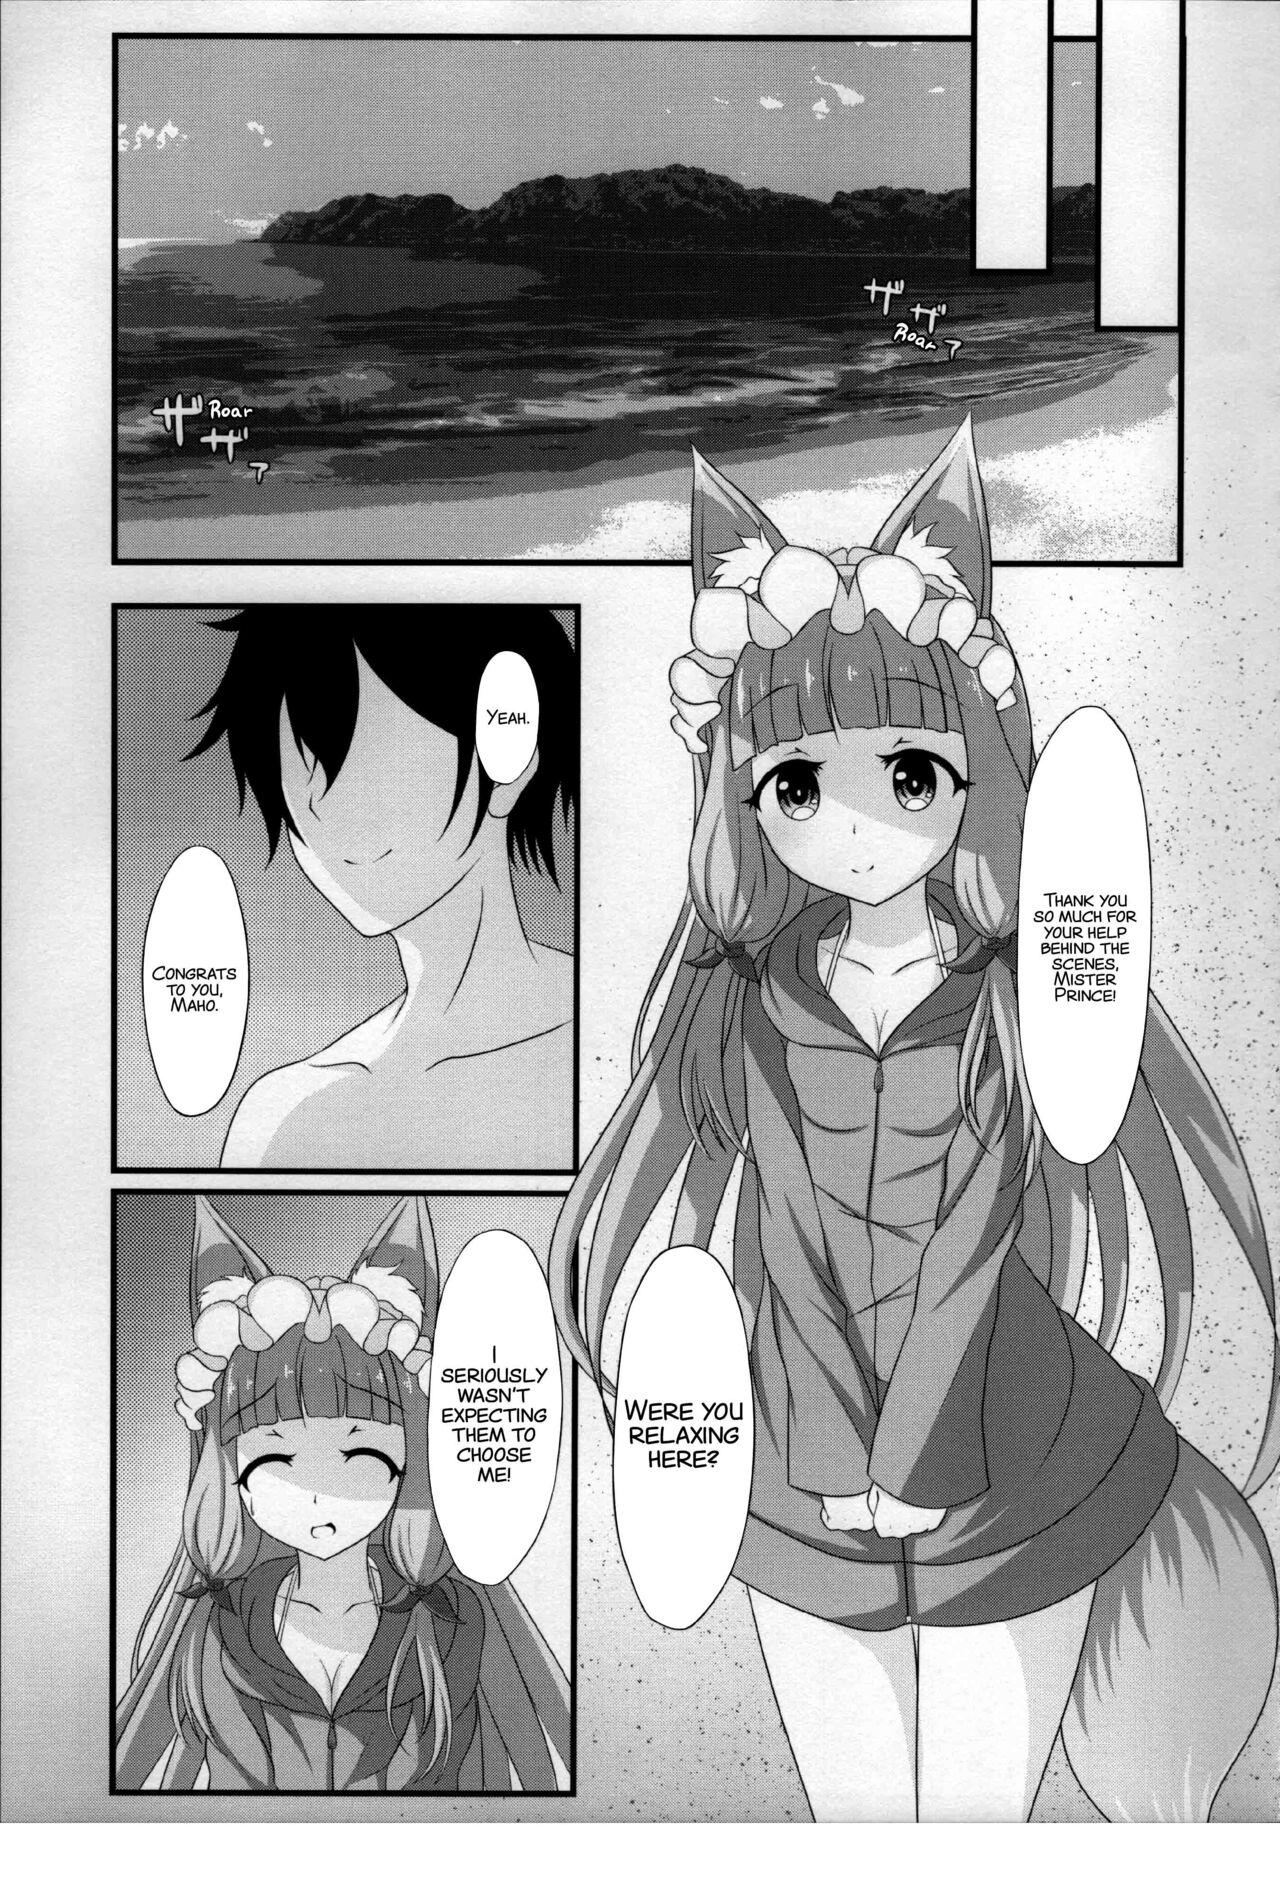 Monster Cock Maho Hime Connect! 2 - Princess connect Buttfucking - Page 6